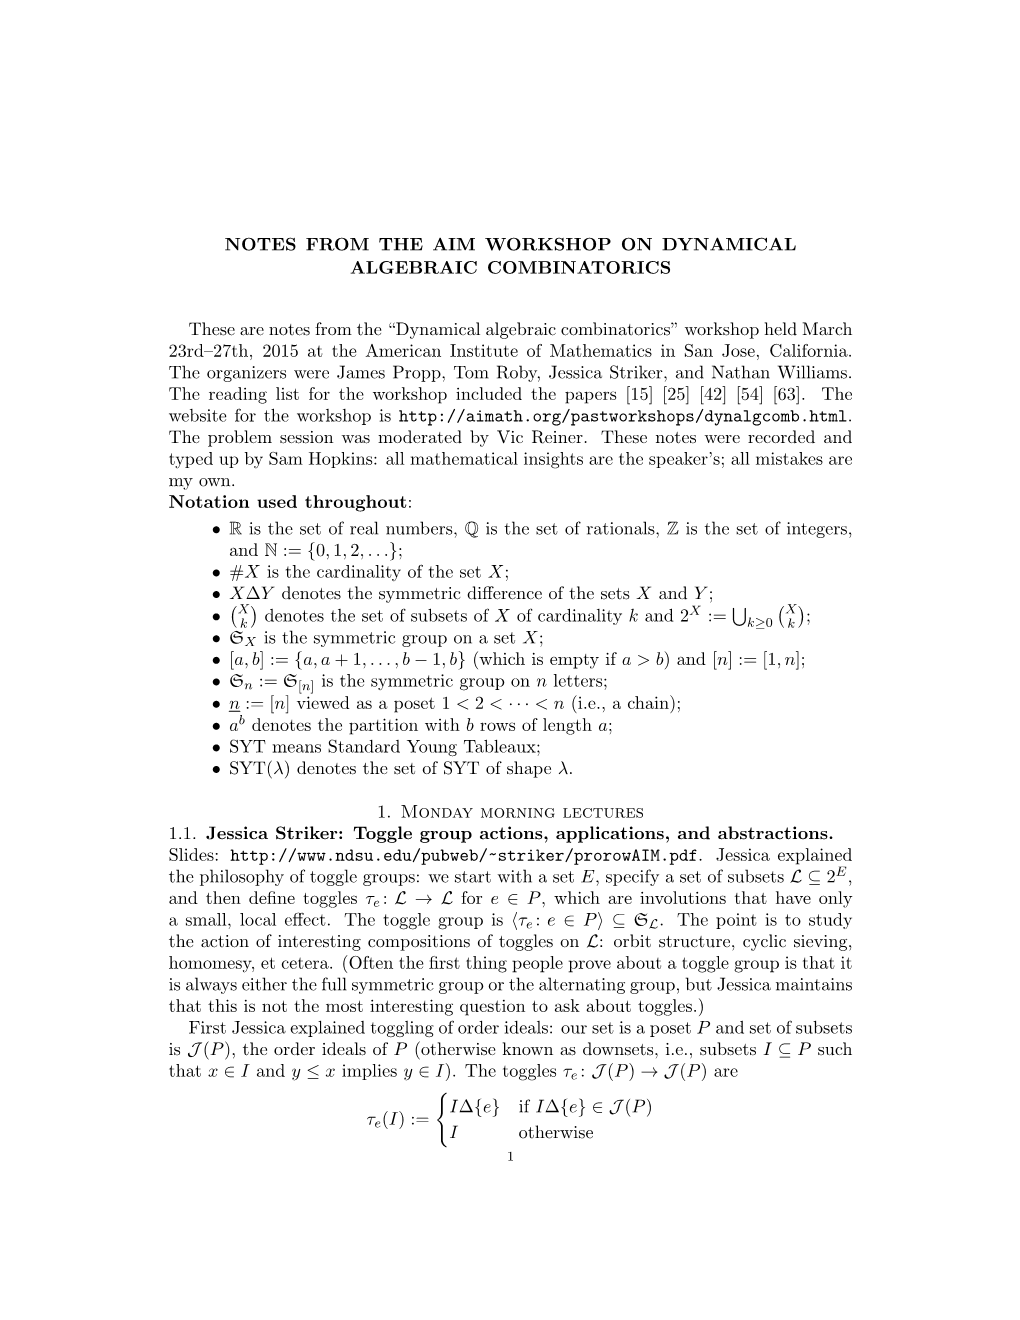 Notes from the Aim Workshop on Dynamical Algebraic Combinatorics